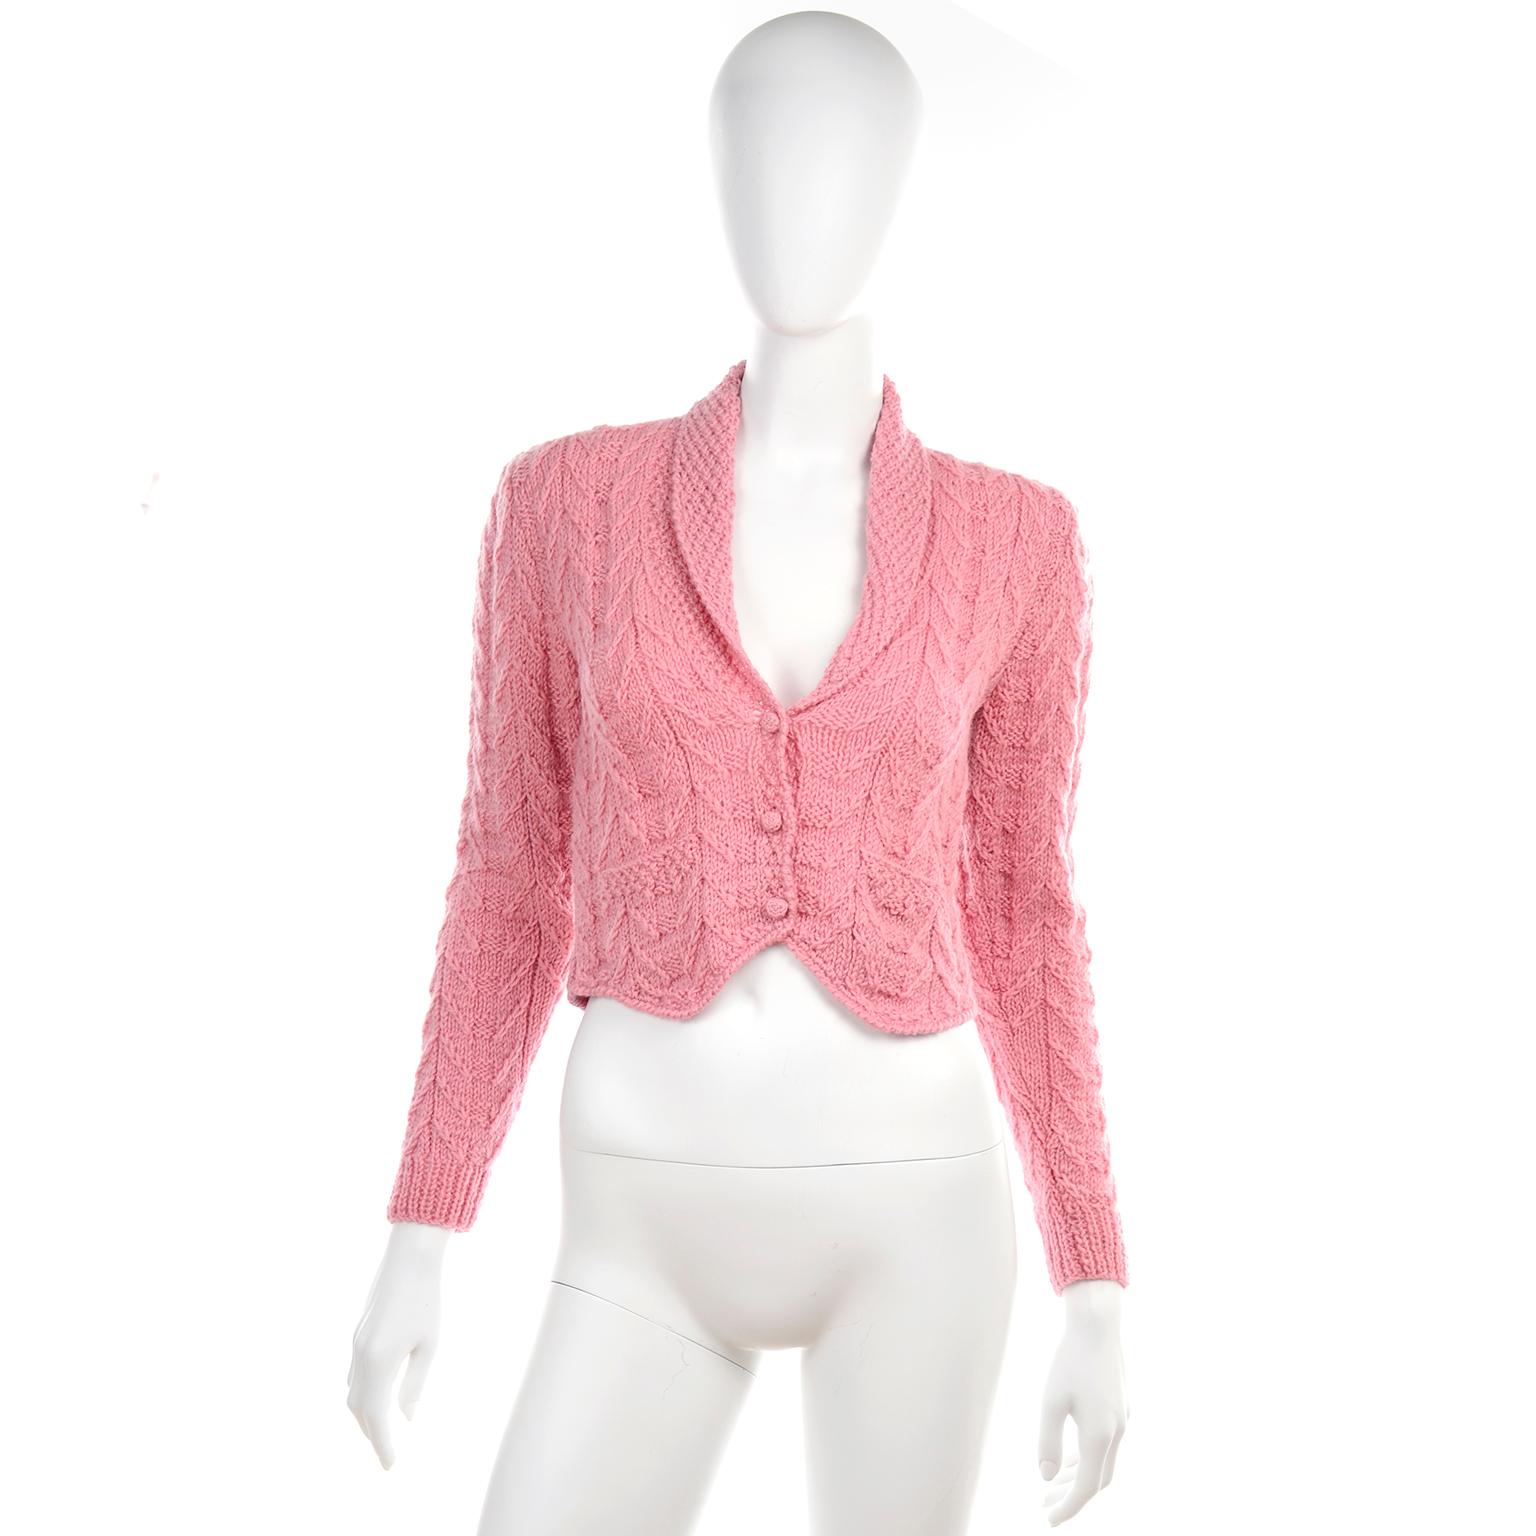 This is a beautiful vintage pink wool knit button front cardigan sweater from Ralph Lauren that is cut like a tuxedo jacket. This sweater came from one of our all time favorite estates of vintage clothing and accessories that included the best